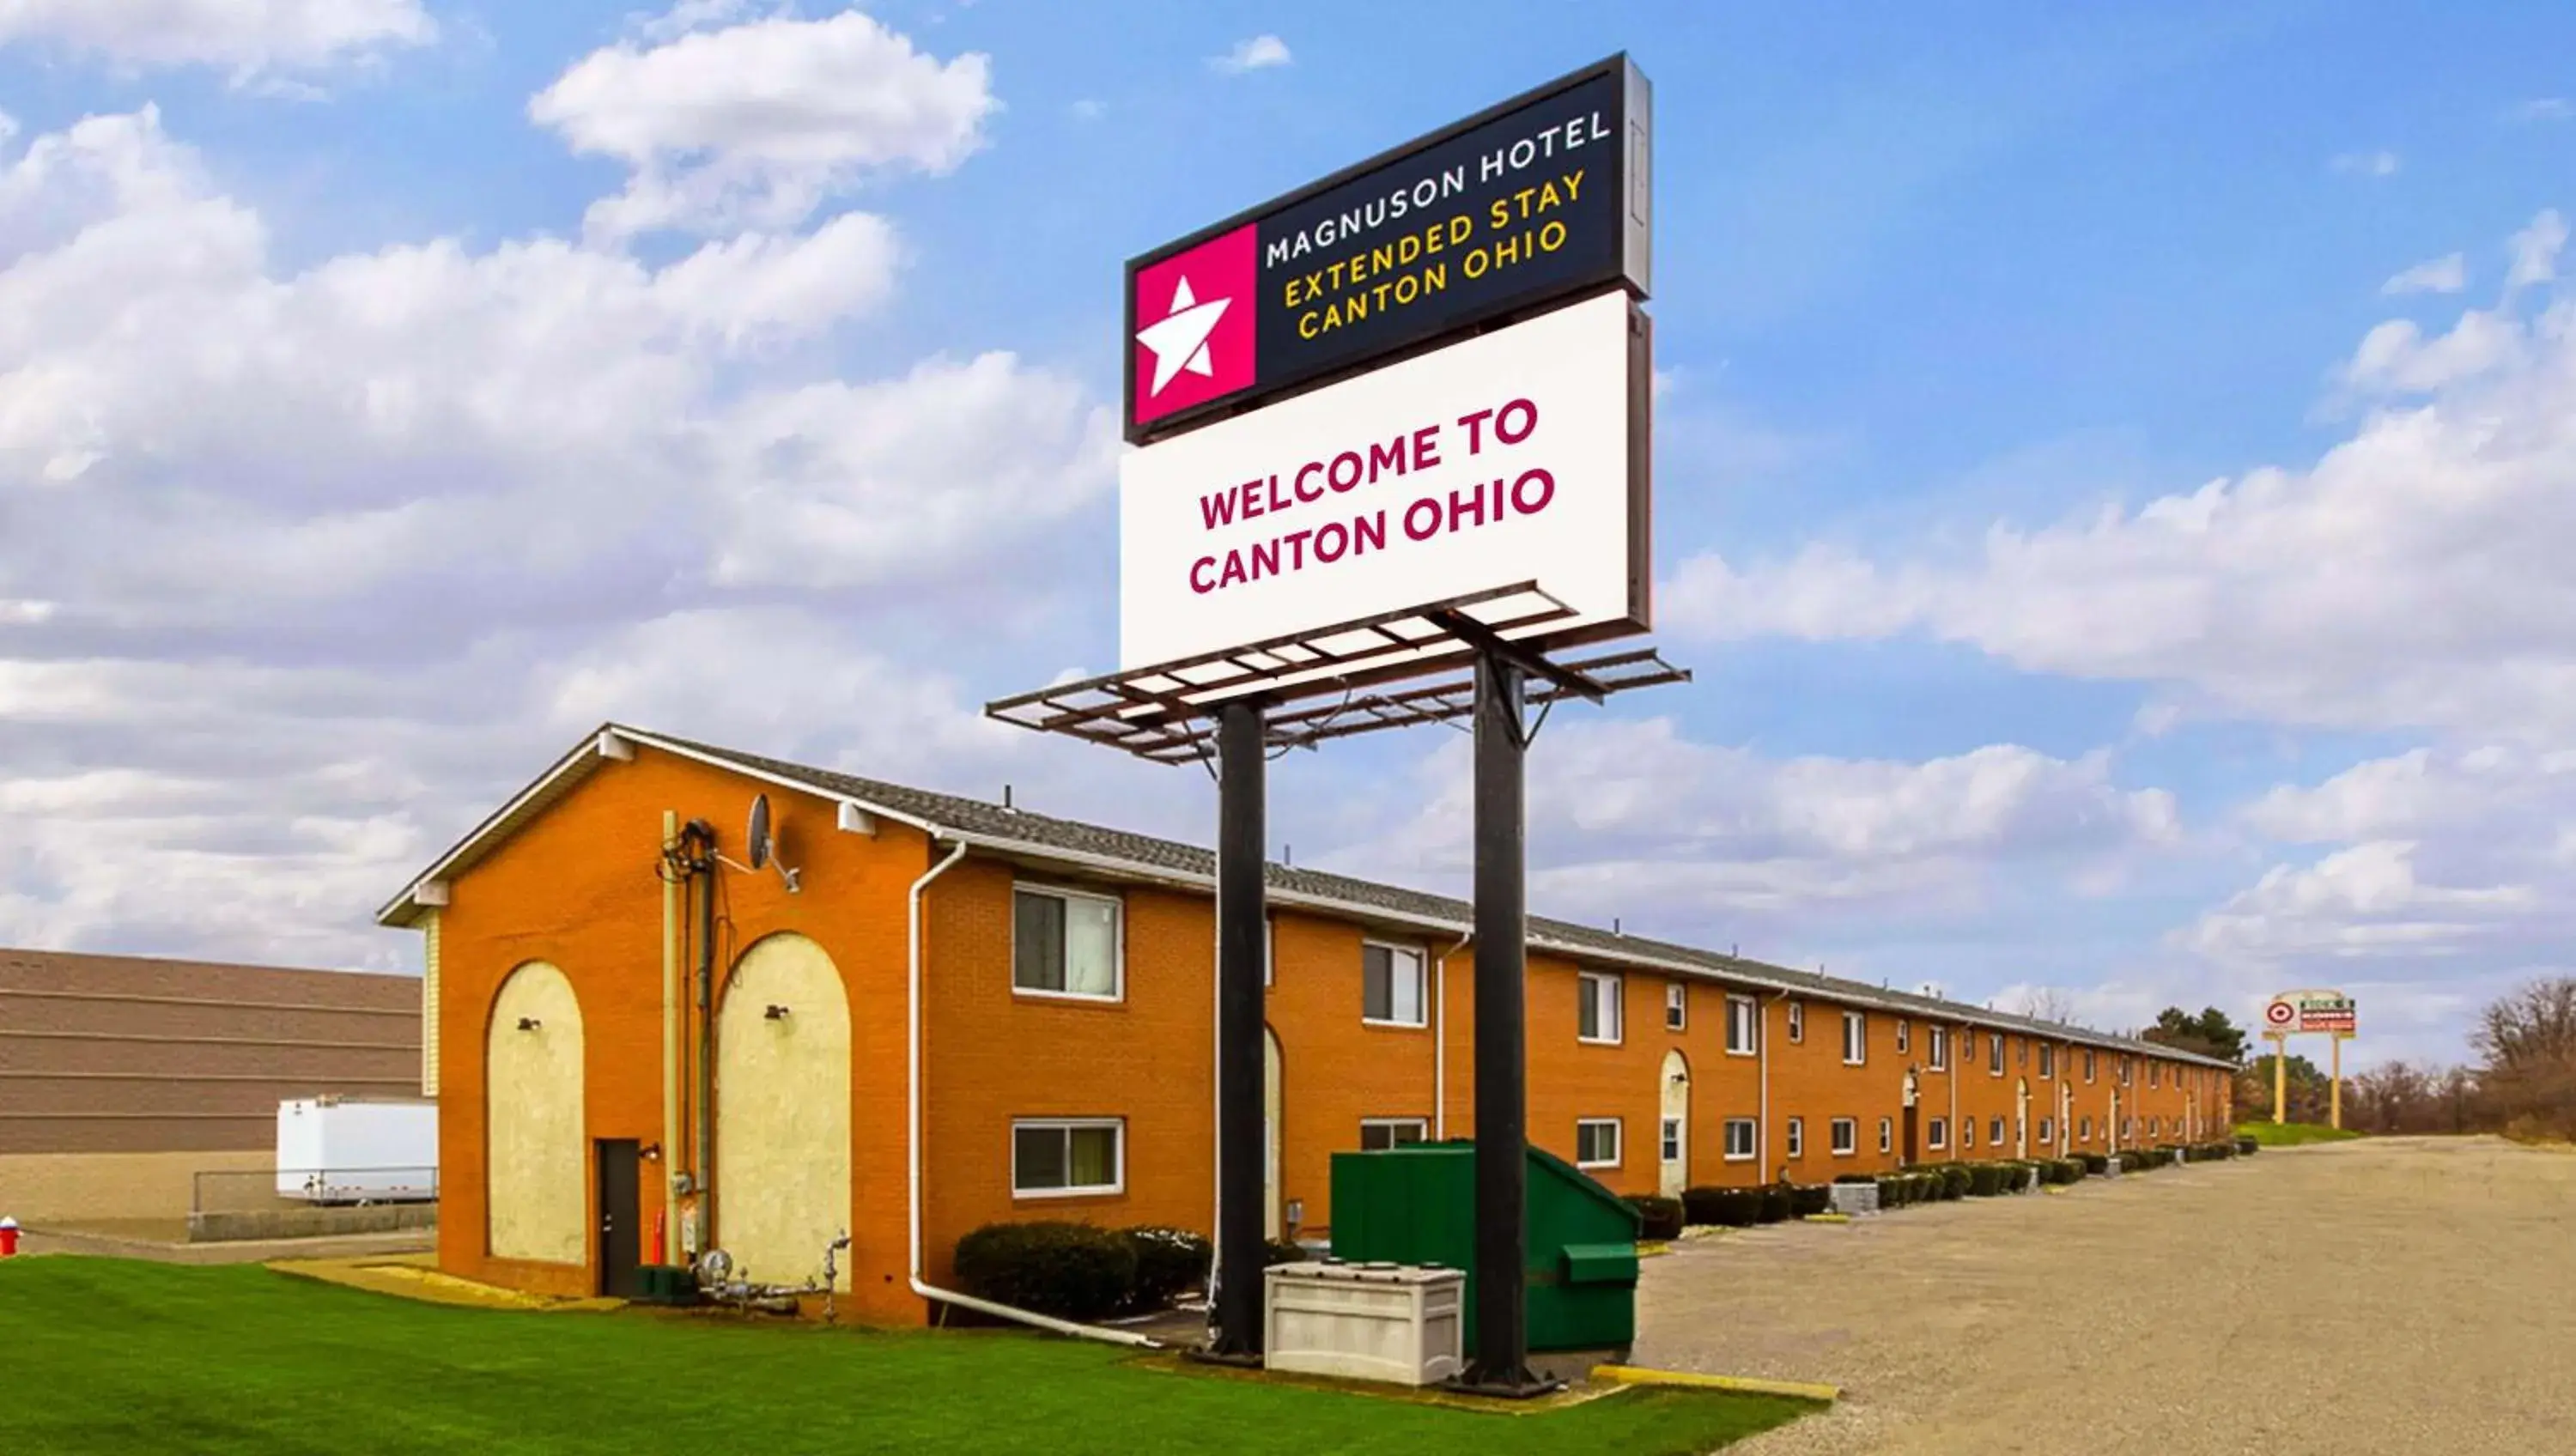 Property building in Magnuson Hotel Extended Stay Canton Ohio